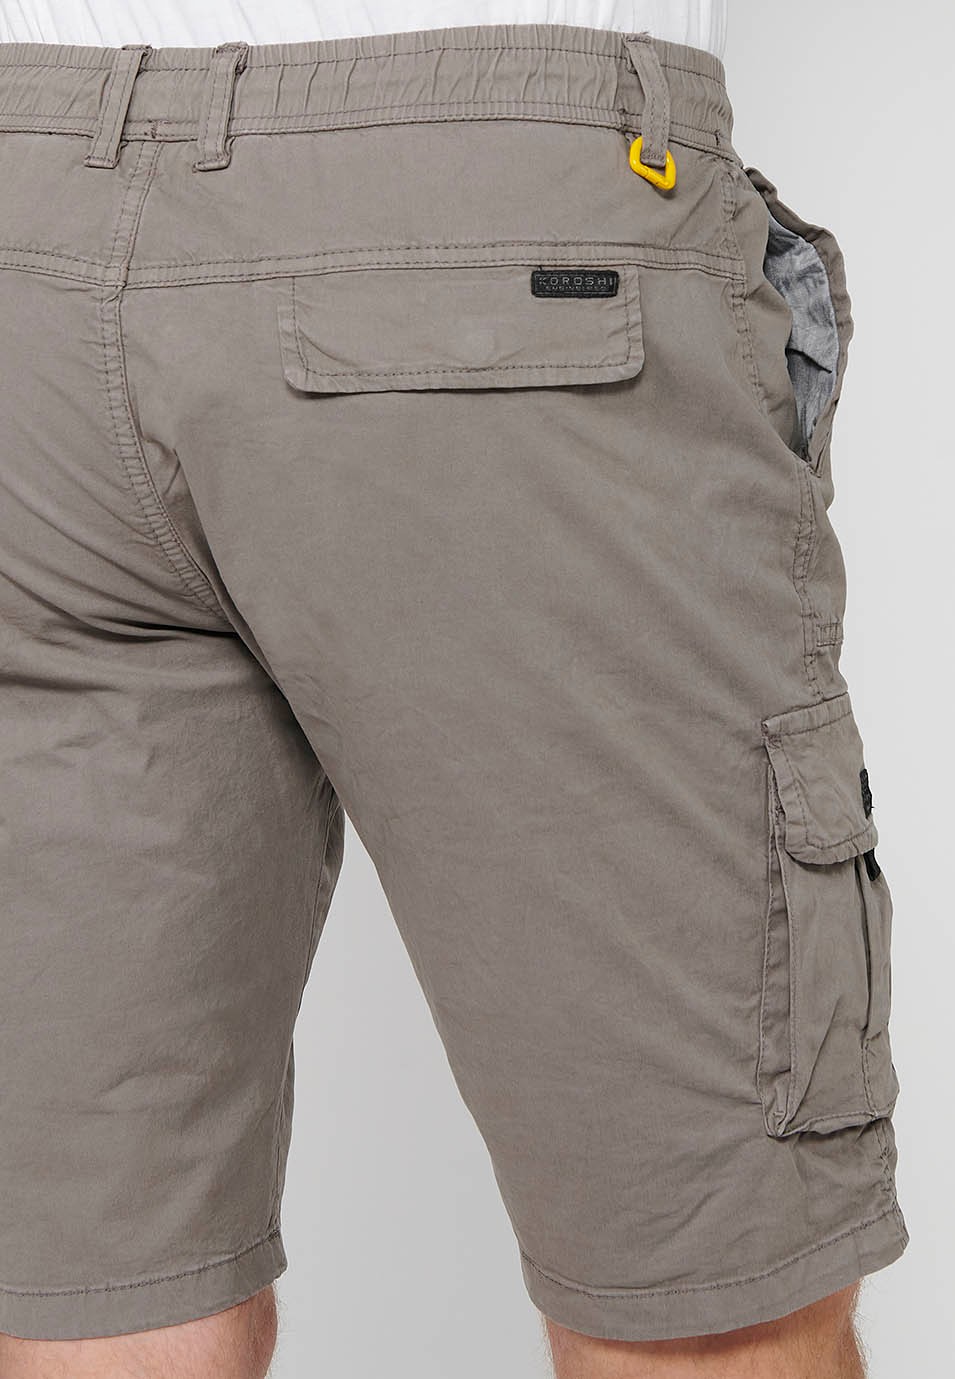 Cargo shorts with side pockets with flap and front closure with zipper and button Taupe Color for Men 5